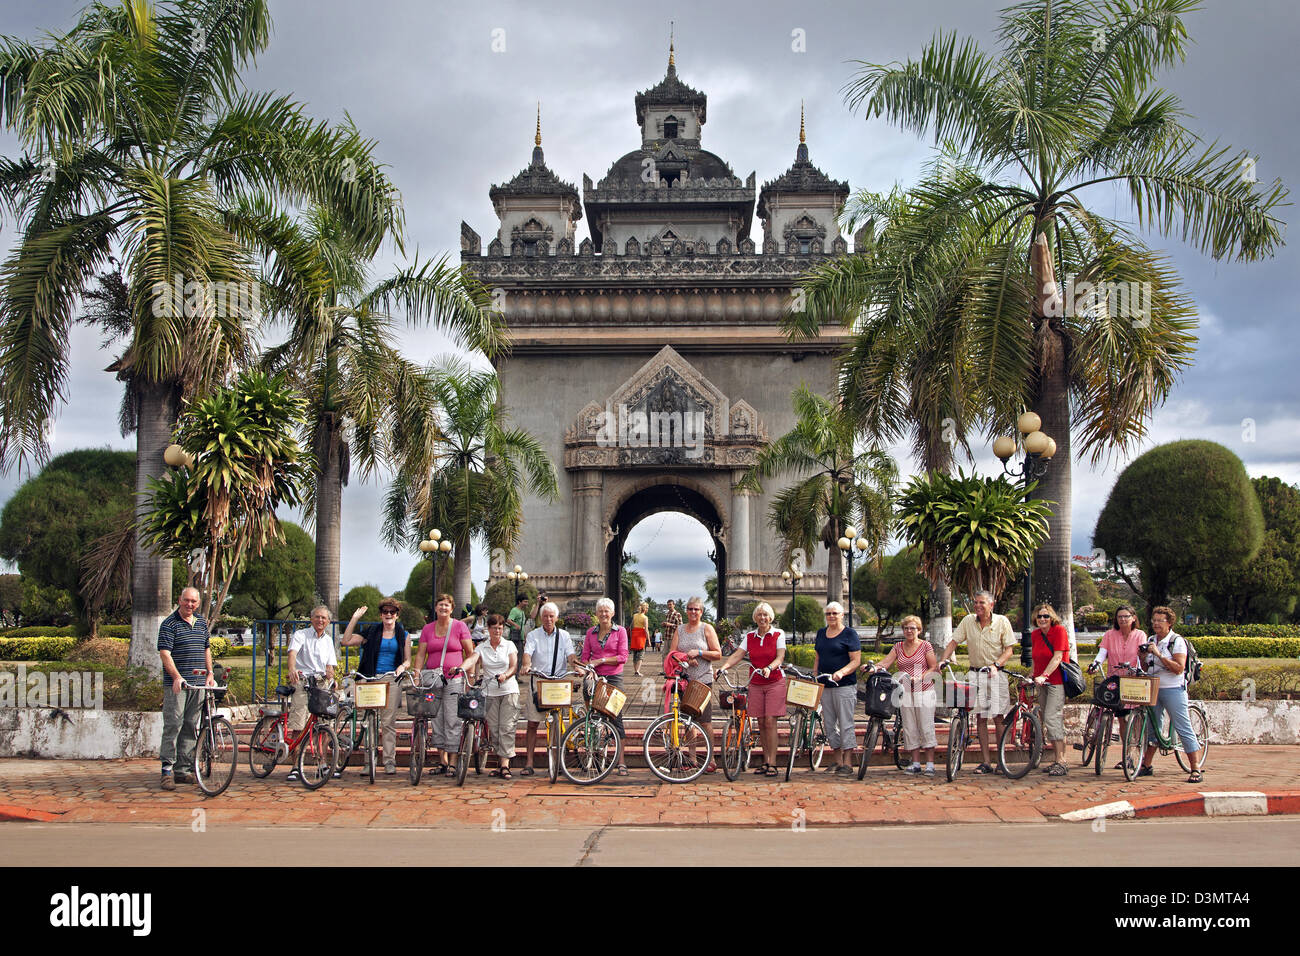 Tourists on bicycles posing in front of Patuxai / Victory Gate / Gate of Triumph at Vientiane, Laos, Southeast Asia Stock Photo